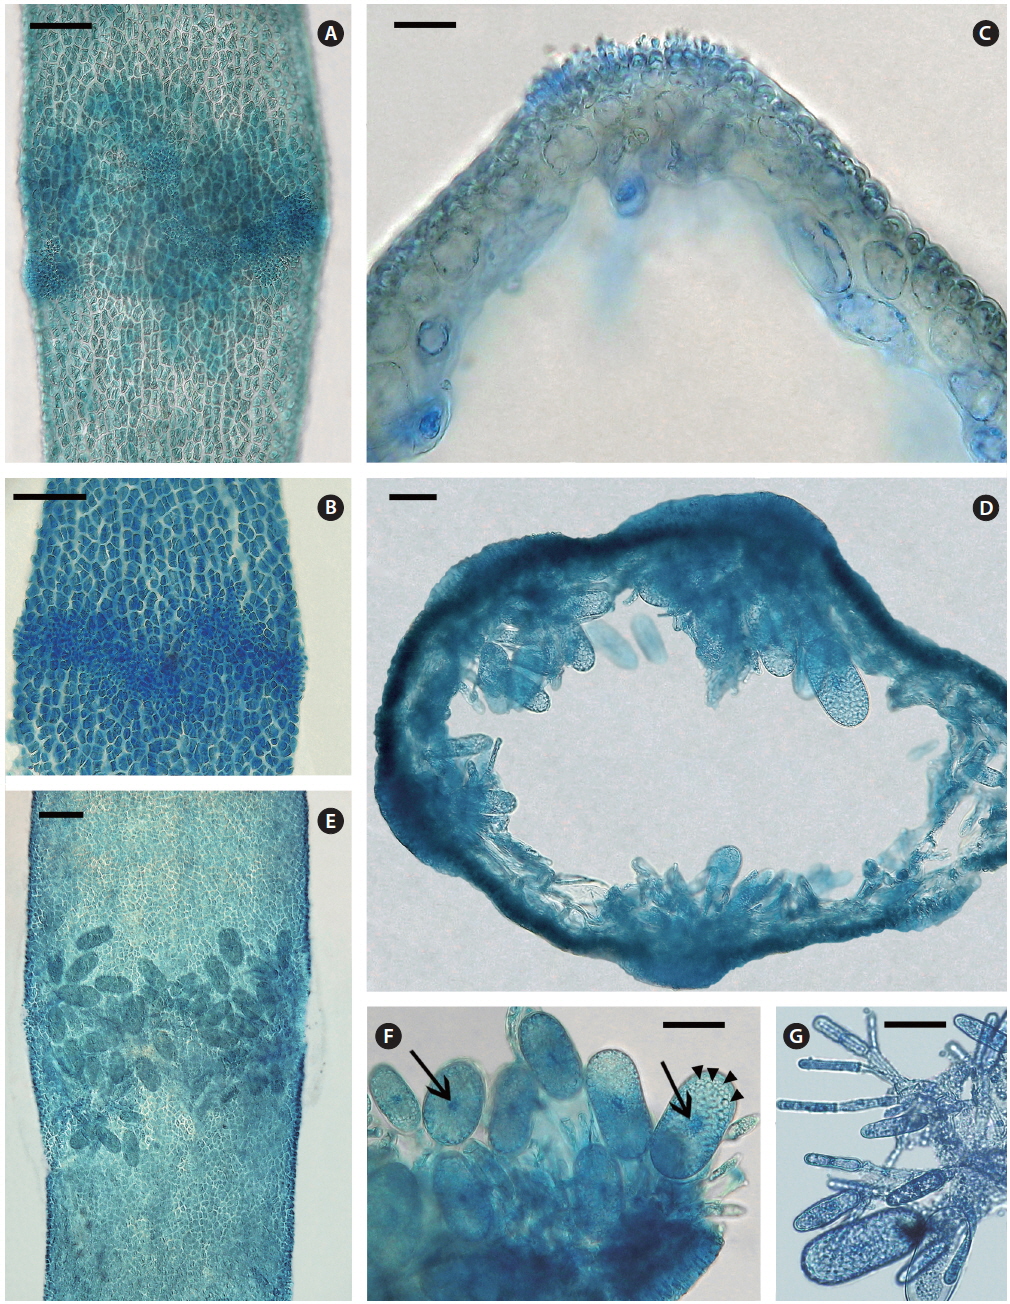 Lemanea manipurensis E. K. Ganesan, J. A. West, Zuccarello et J. Rout sp. nov. All specimens lightly stained with aniline blue. (A) Small spermatangial patches around an old branch perimeter. (B) Spermatangial patches extend almost continuously around a young branch perimeter. (C) Branch cross section with small spermatangial patch erumpent on outer cortex. (D) Cross section with carposporophytes projecting into the hollow branch center. (E) Surface view of several carposporophytes in a whorl projecting inwardly. (F) Single carpospores terminal on carposporophyte branches. Numerous small colourless spherical bodies (arrowheads) and central nucleus (arrows) visible in each carpospore. (G) Individual carposporophyte removed from thallus to show repeated branching and terminal carpospores. Scale bars represent: A, 65 μm; B, 25 μm; C, 100 μm; D-G, 40 μm.